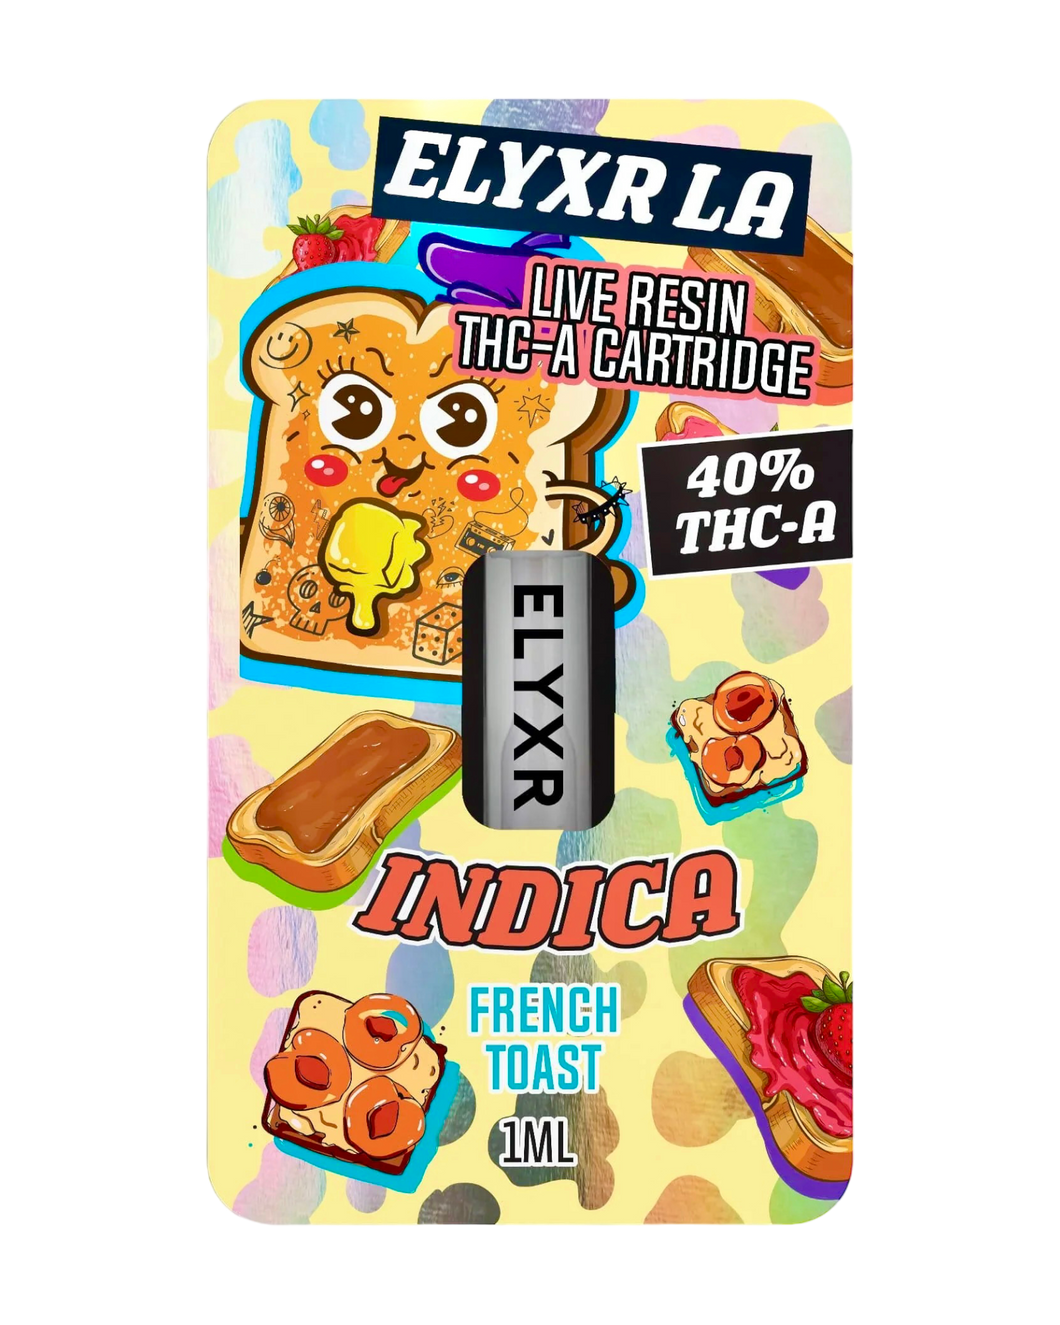 An Indica French Toast Elyxr LA Live Resin THC-A Cartridge (1 gram/1mL).